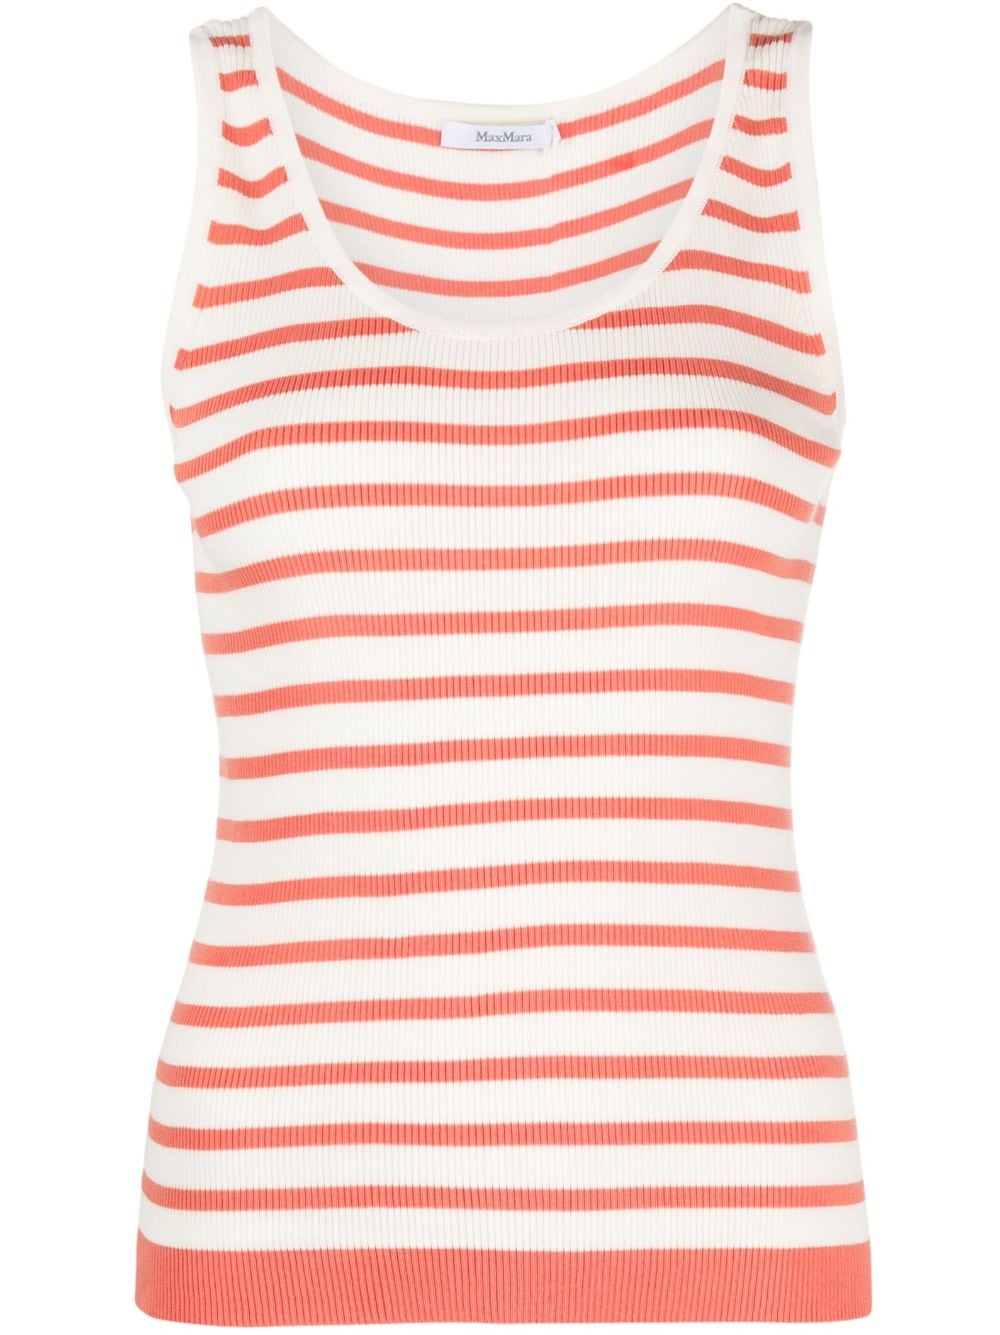 Image 1 of Max Mara striped knitted tank top